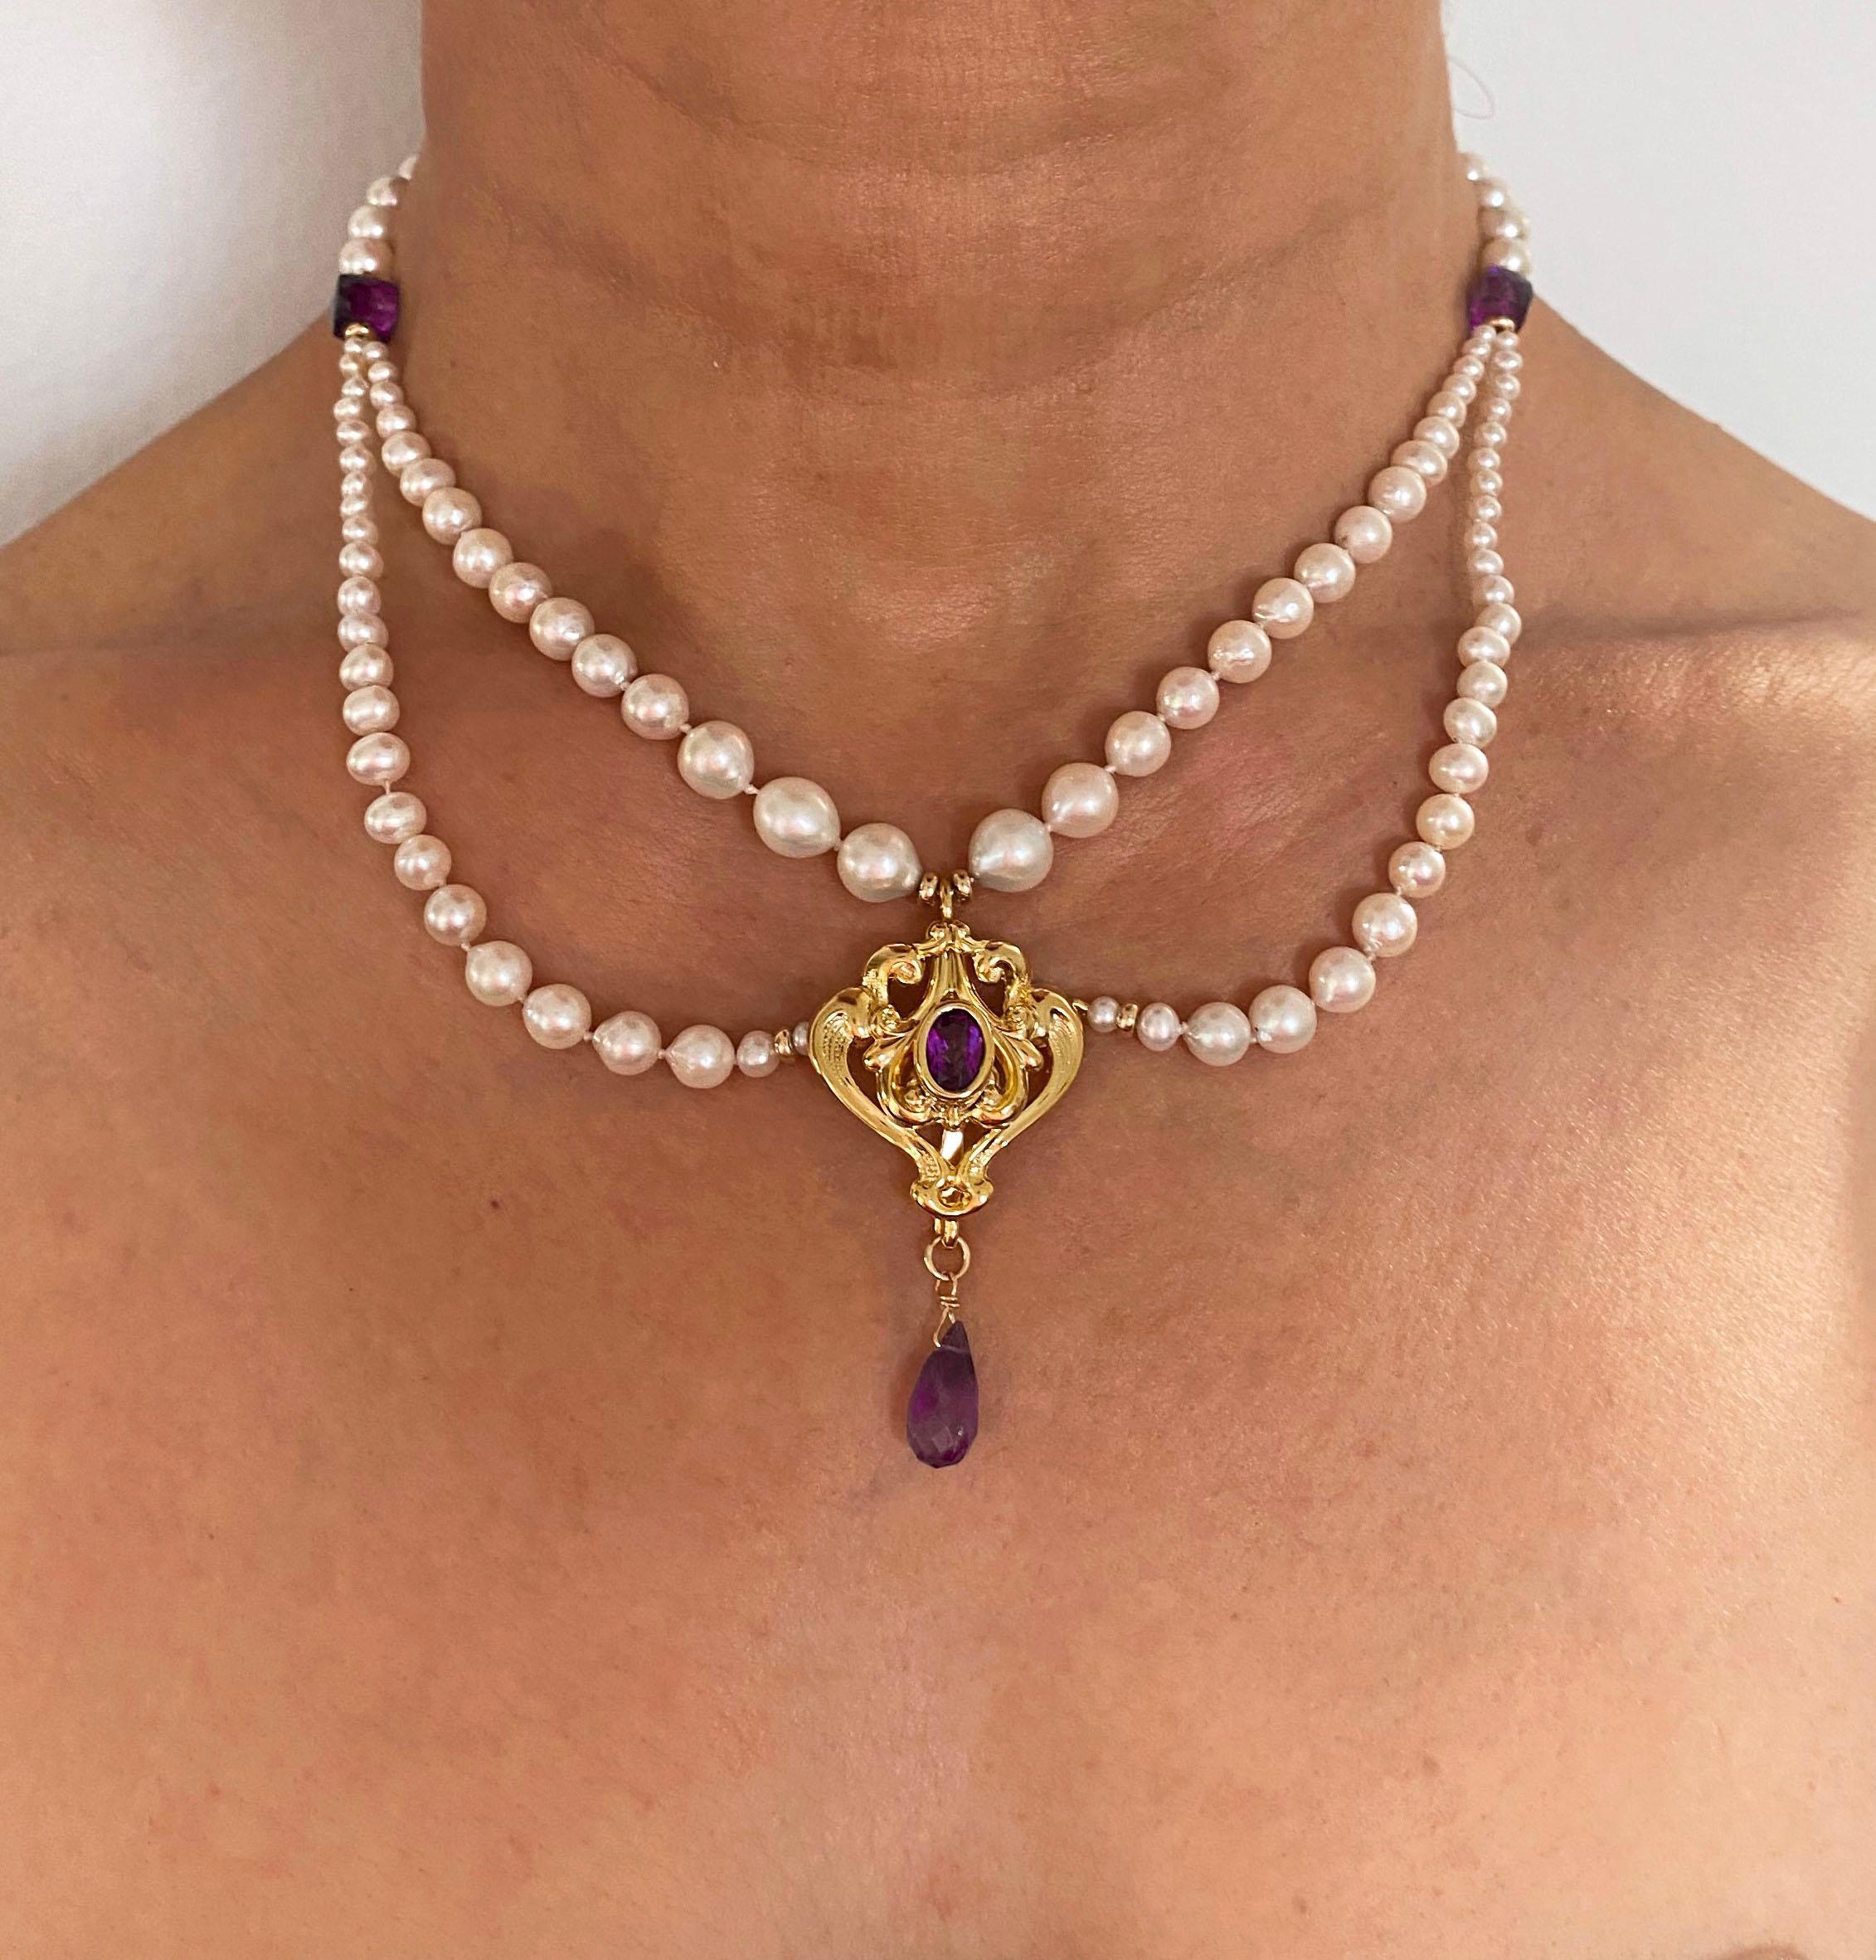 Late Victorian Marina J. Graduated Pearl and Amethyst Necklace with 14K Yellow Gold